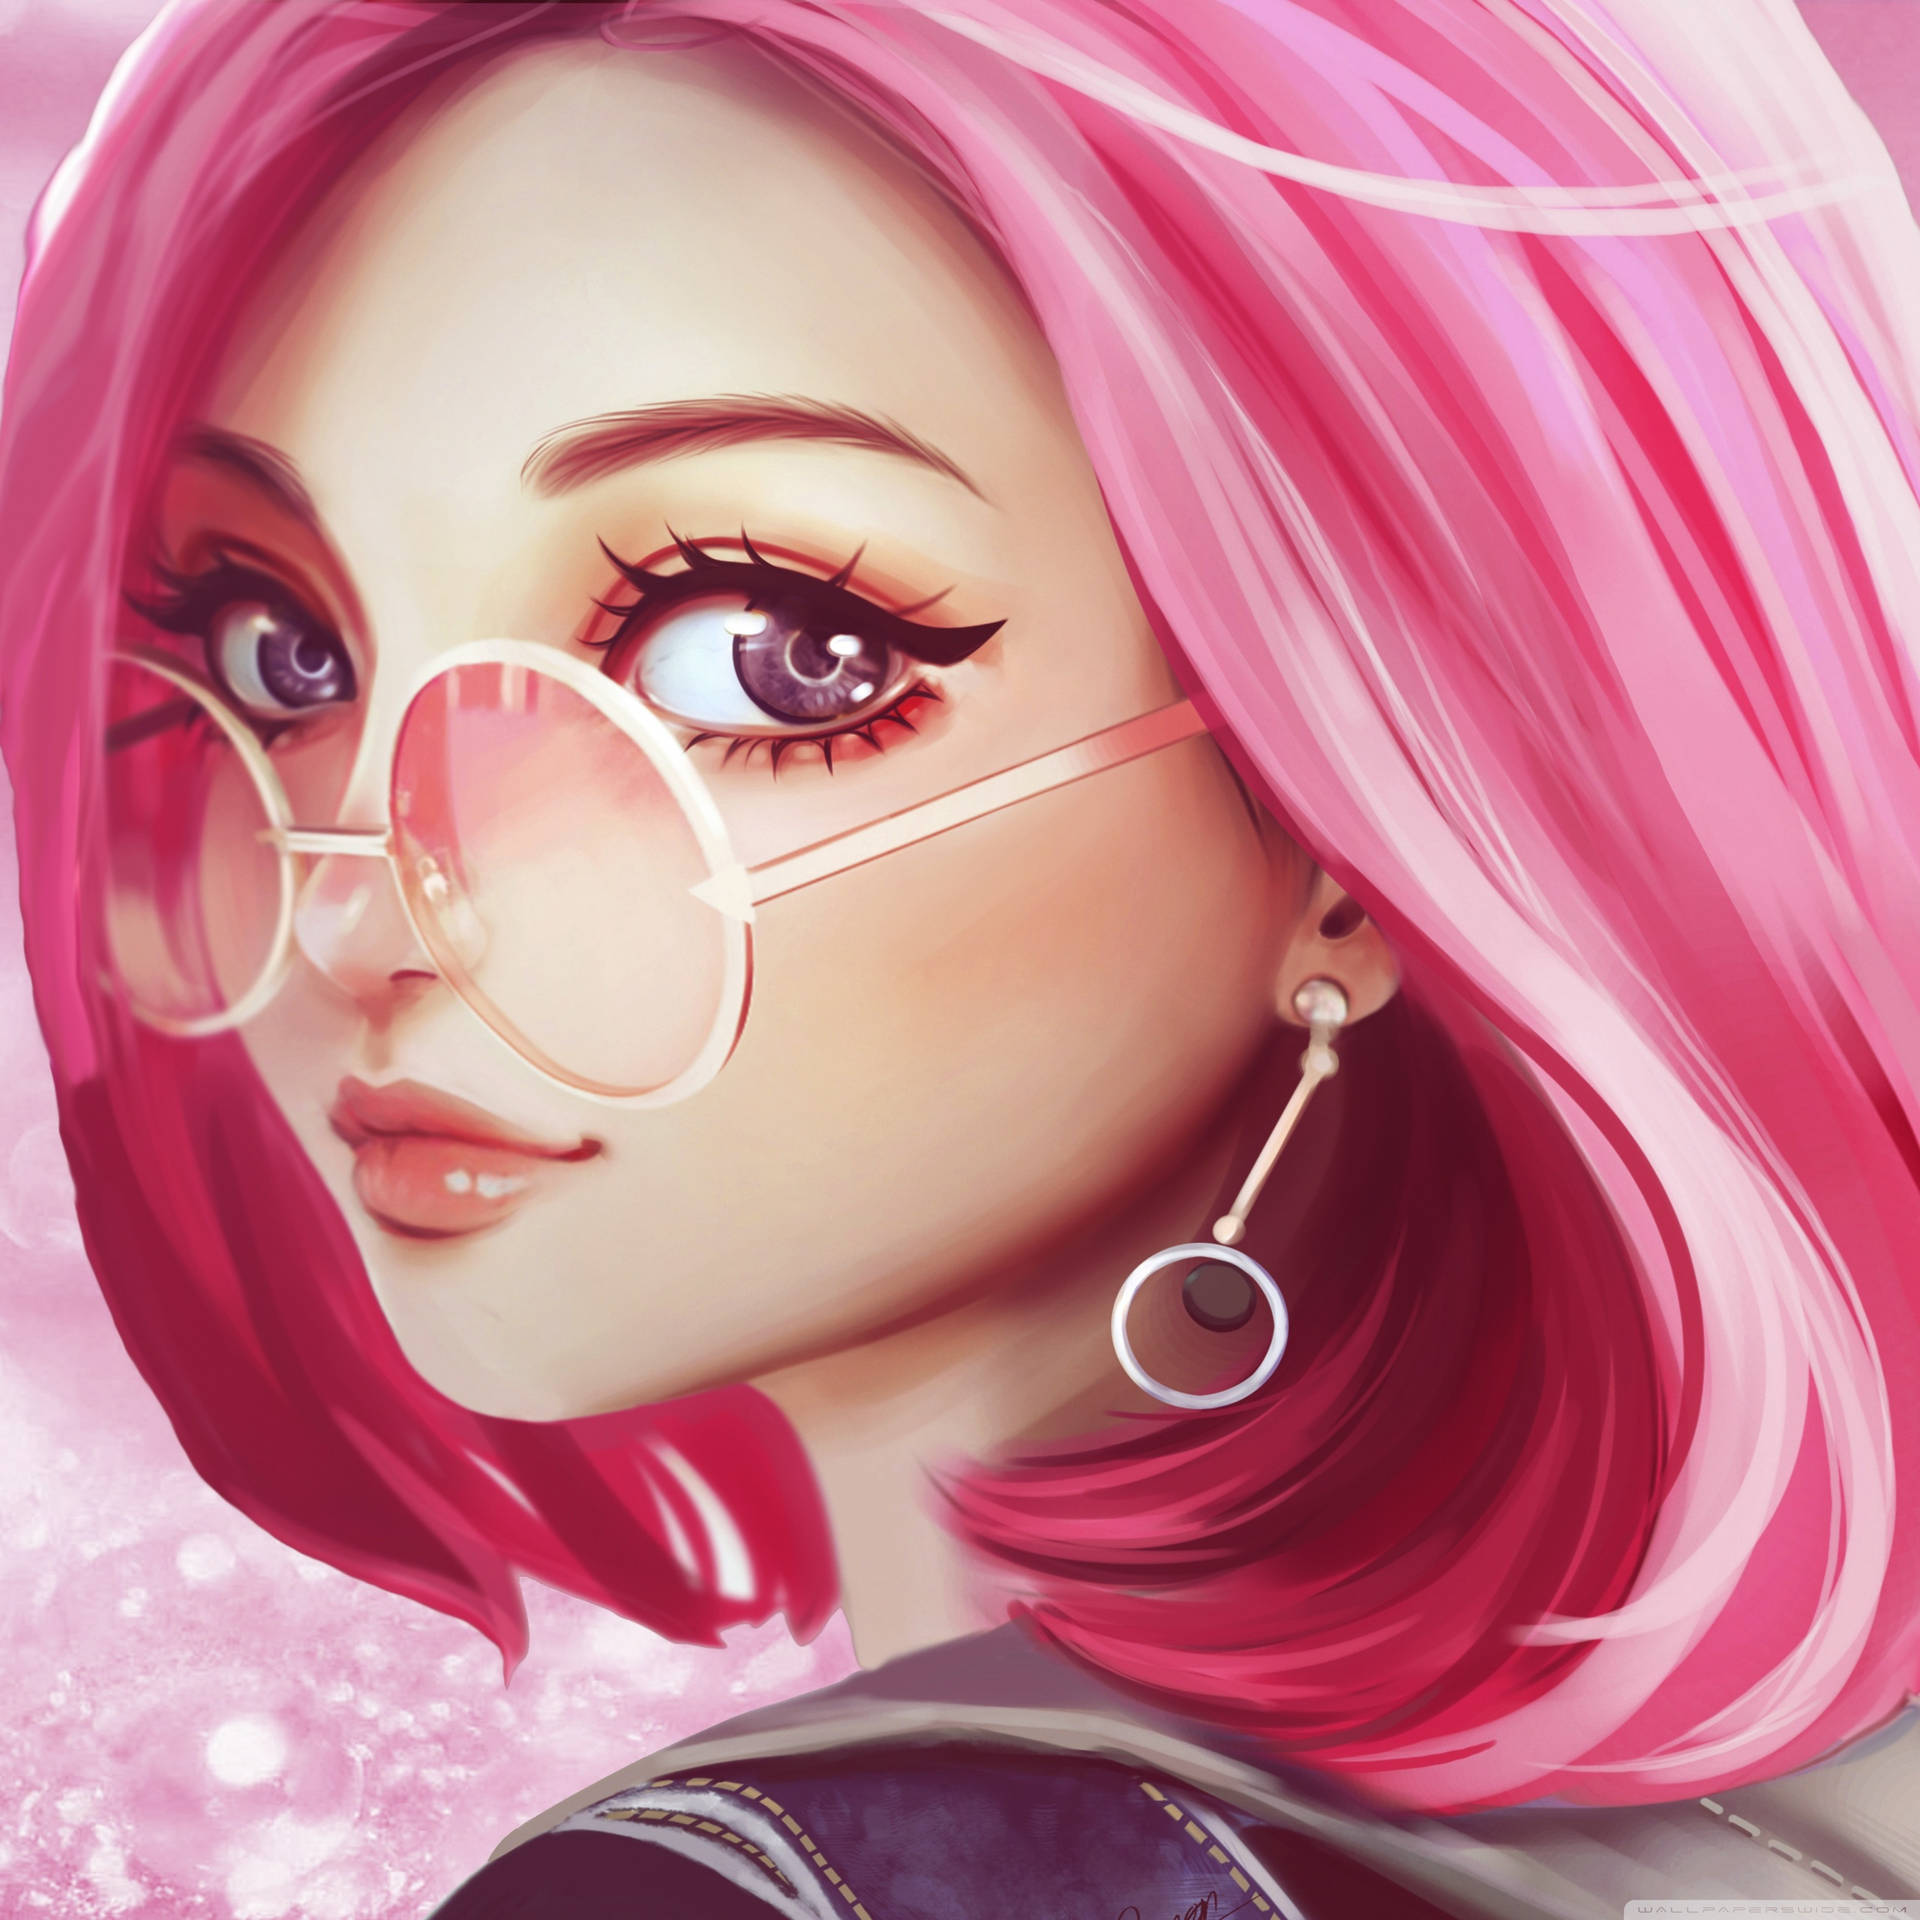 Cute Pink Girl Close Up Portrait Background